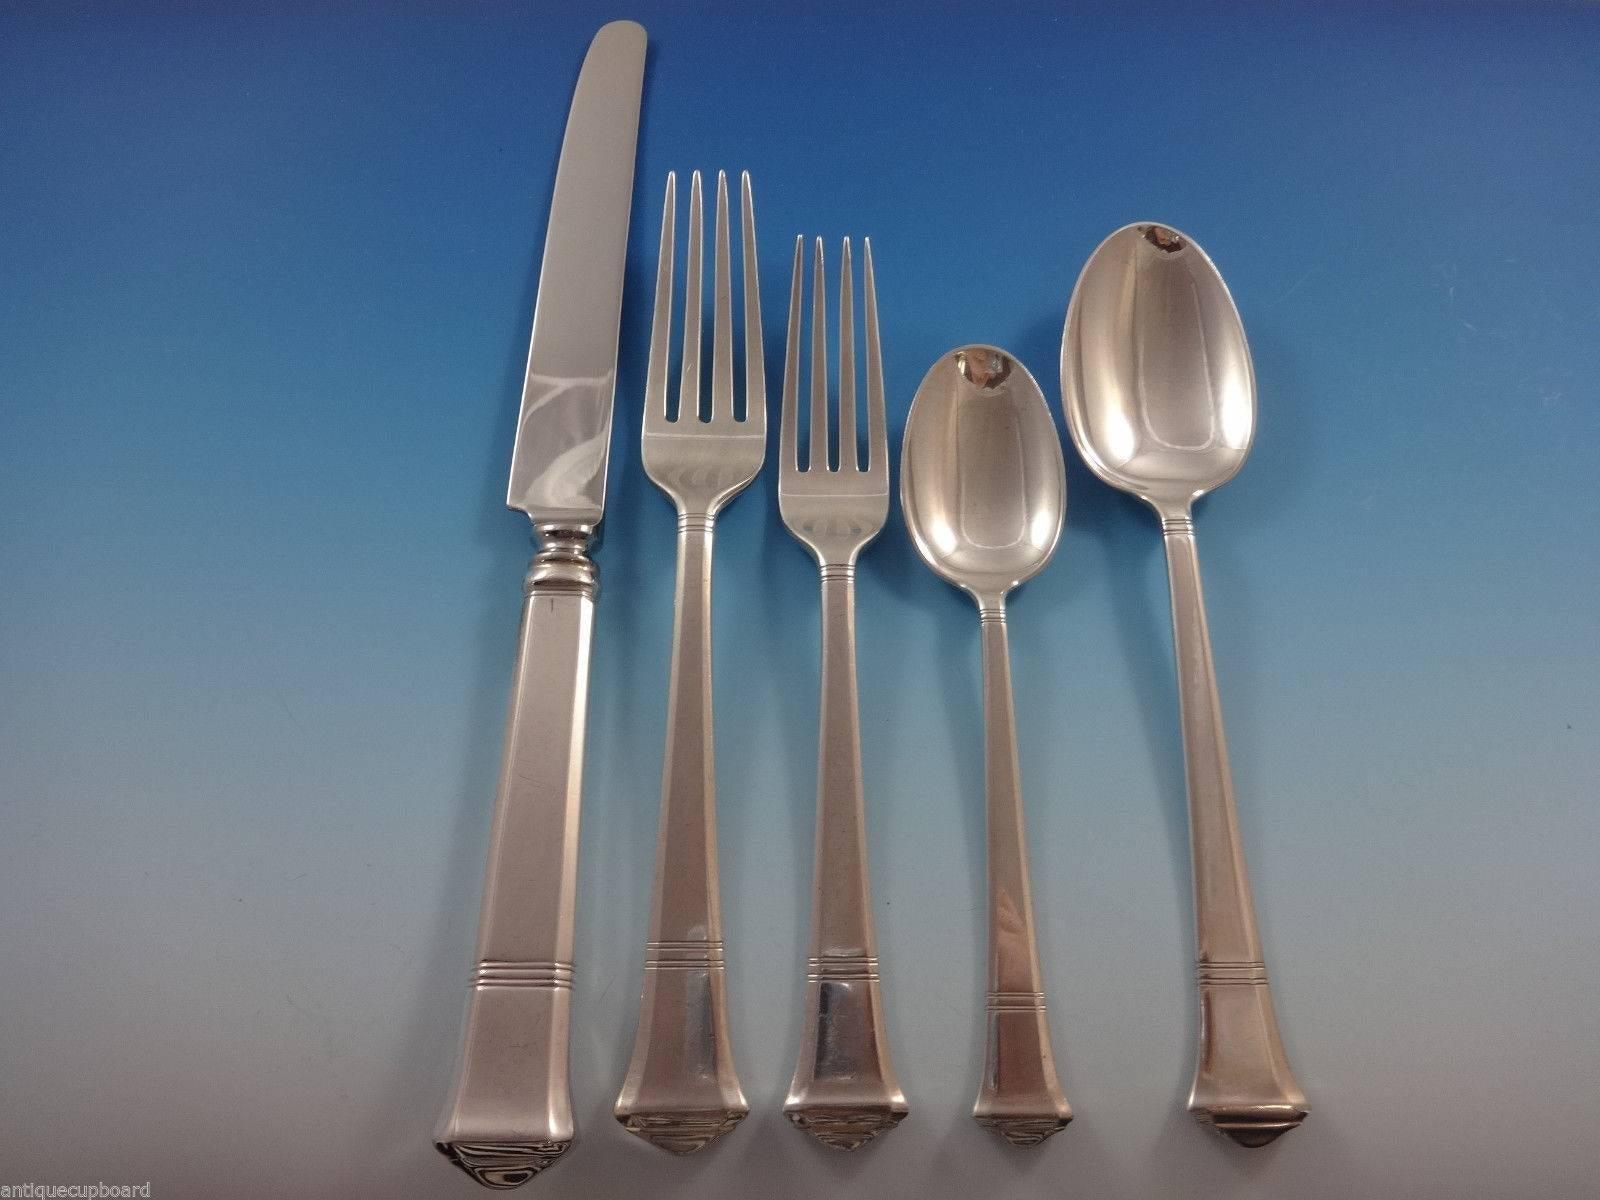 Designed with an eye for balance and proportion, each piece of Tiffany & Co. flatware is a masterpiece of form and function.

Windham by Tiffany & Co. sterling silver flatware set - 33 Pieces. Great starter set! This set includes:

Six dinner